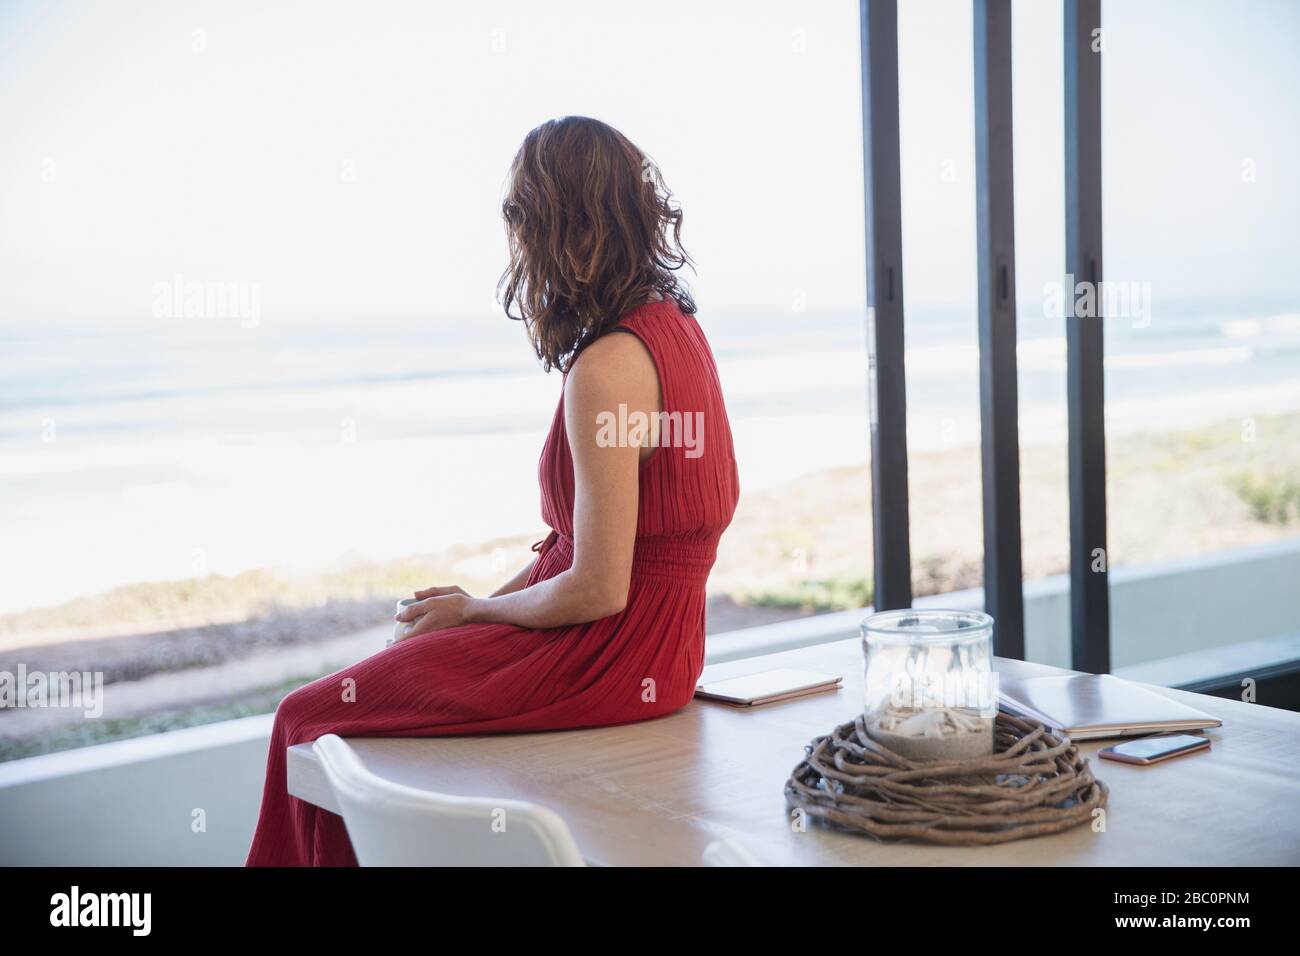 Pensive, serene brunette woman looking at ocean view from dining room table Stock Photo